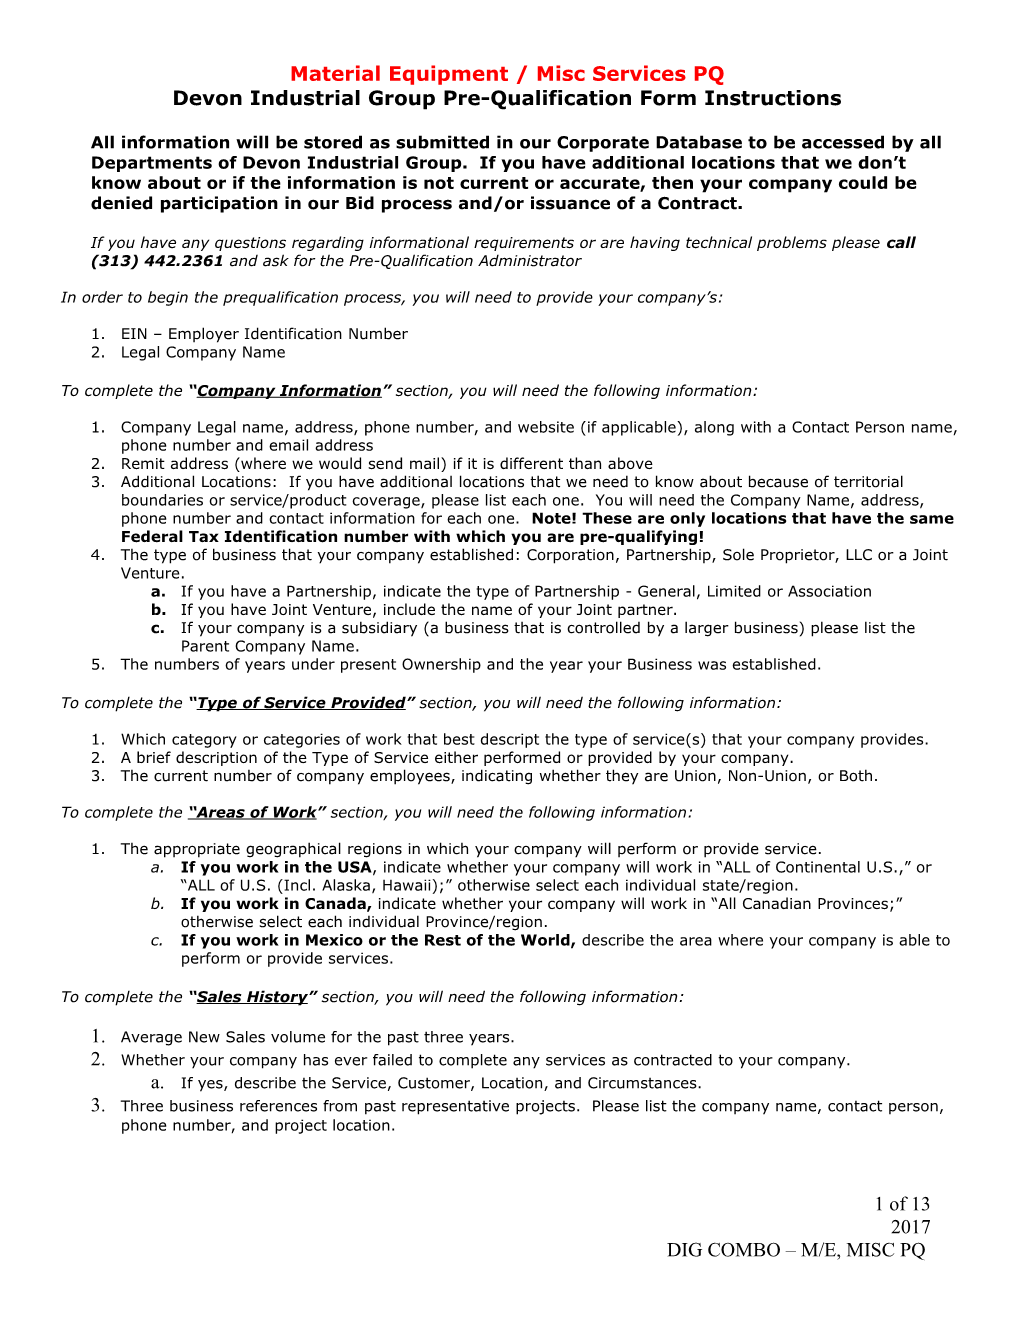 Pre-Qualification Form Instructions (Material/Equip